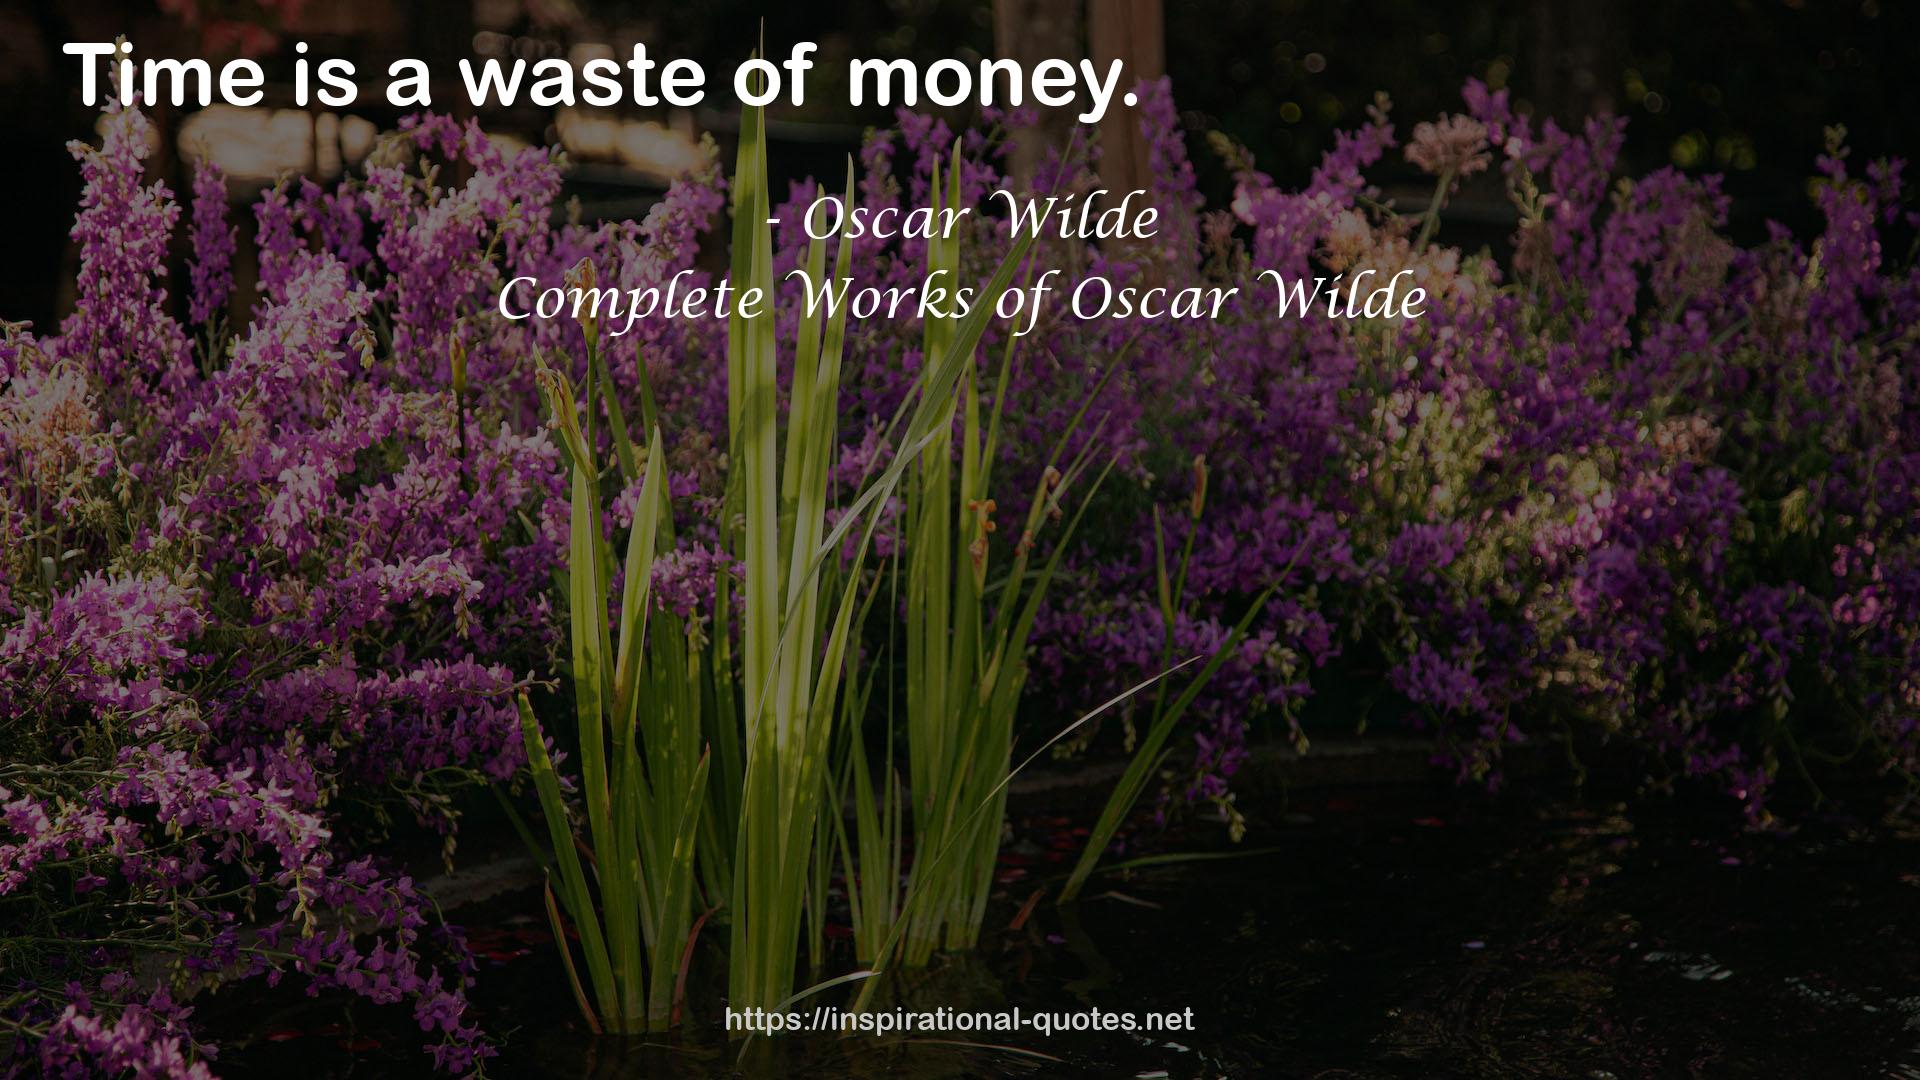 Complete Works of Oscar Wilde QUOTES